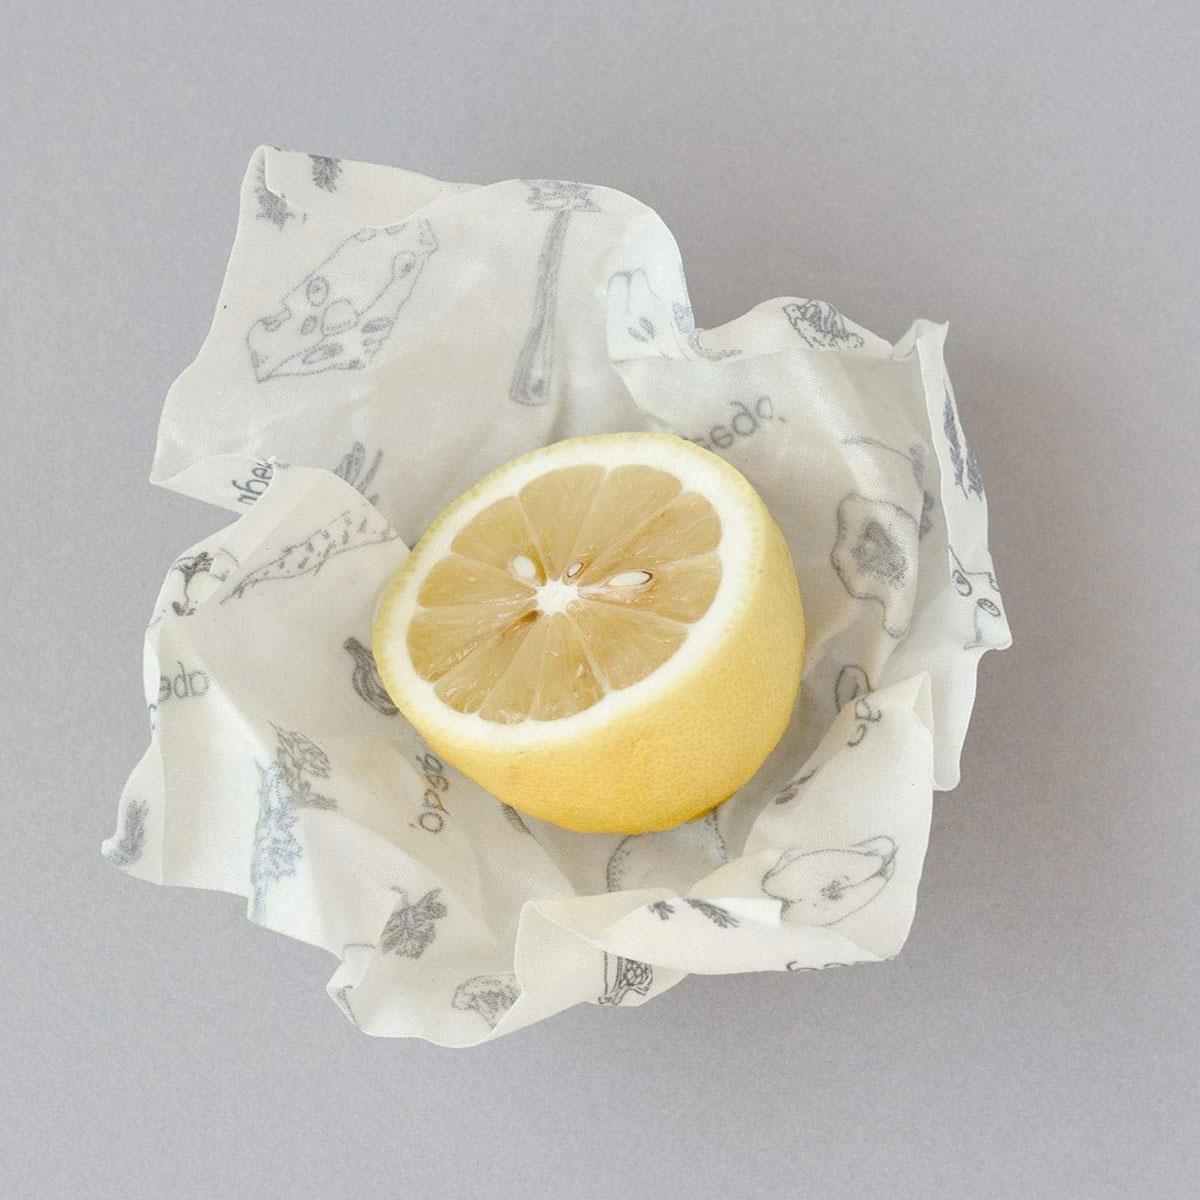 Abeego Reuseable Beeswax Food Wrap Small 